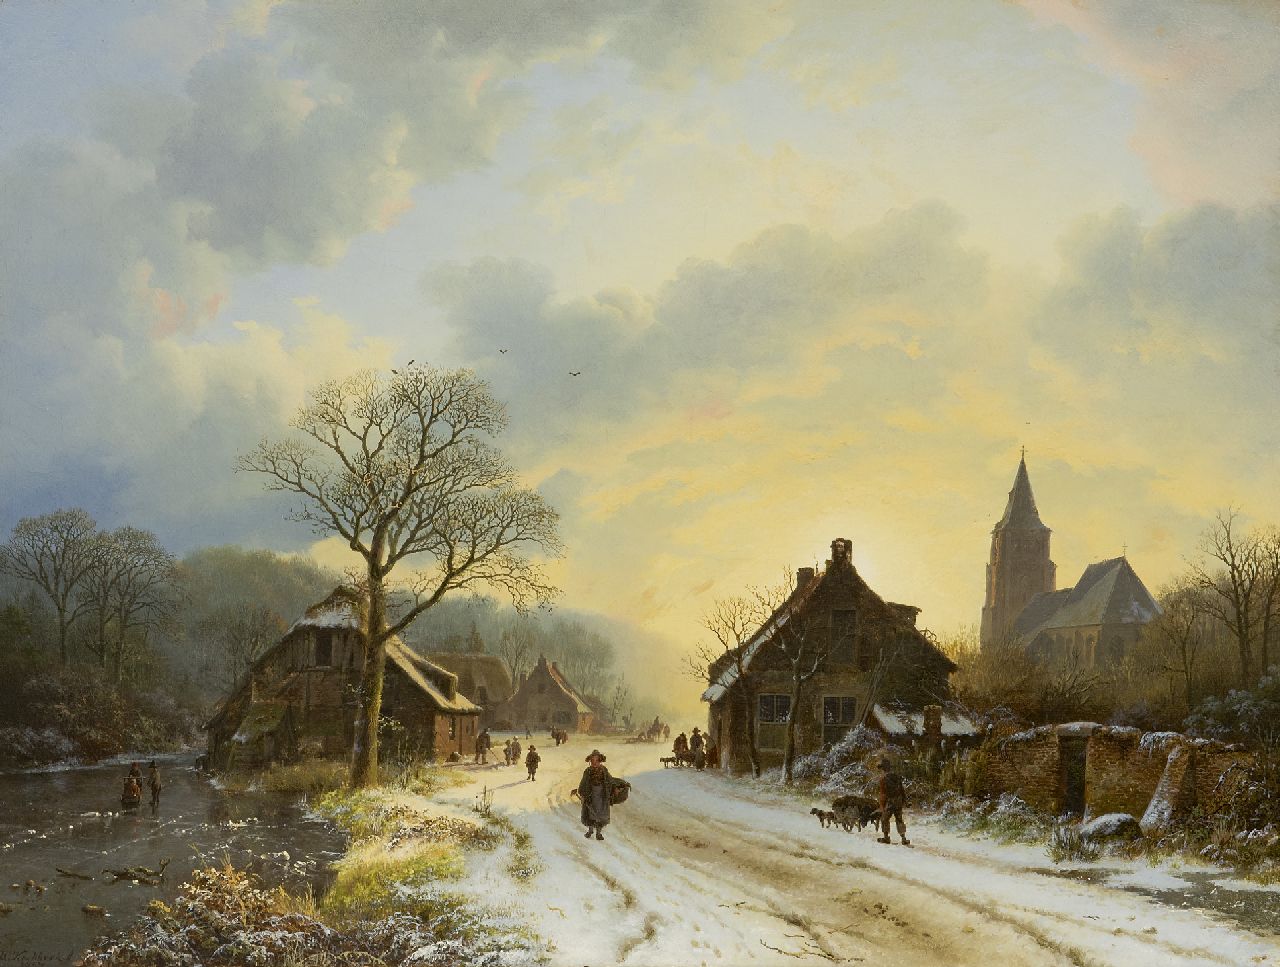 Koekkoek B.C.  | Barend Cornelis Koekkoek, A Lower Rhine winter landscape with a church inspired by the village church at Aerdt, oil on canvas 39.7 x 52.4 cm, signed l.l. and dated 1837